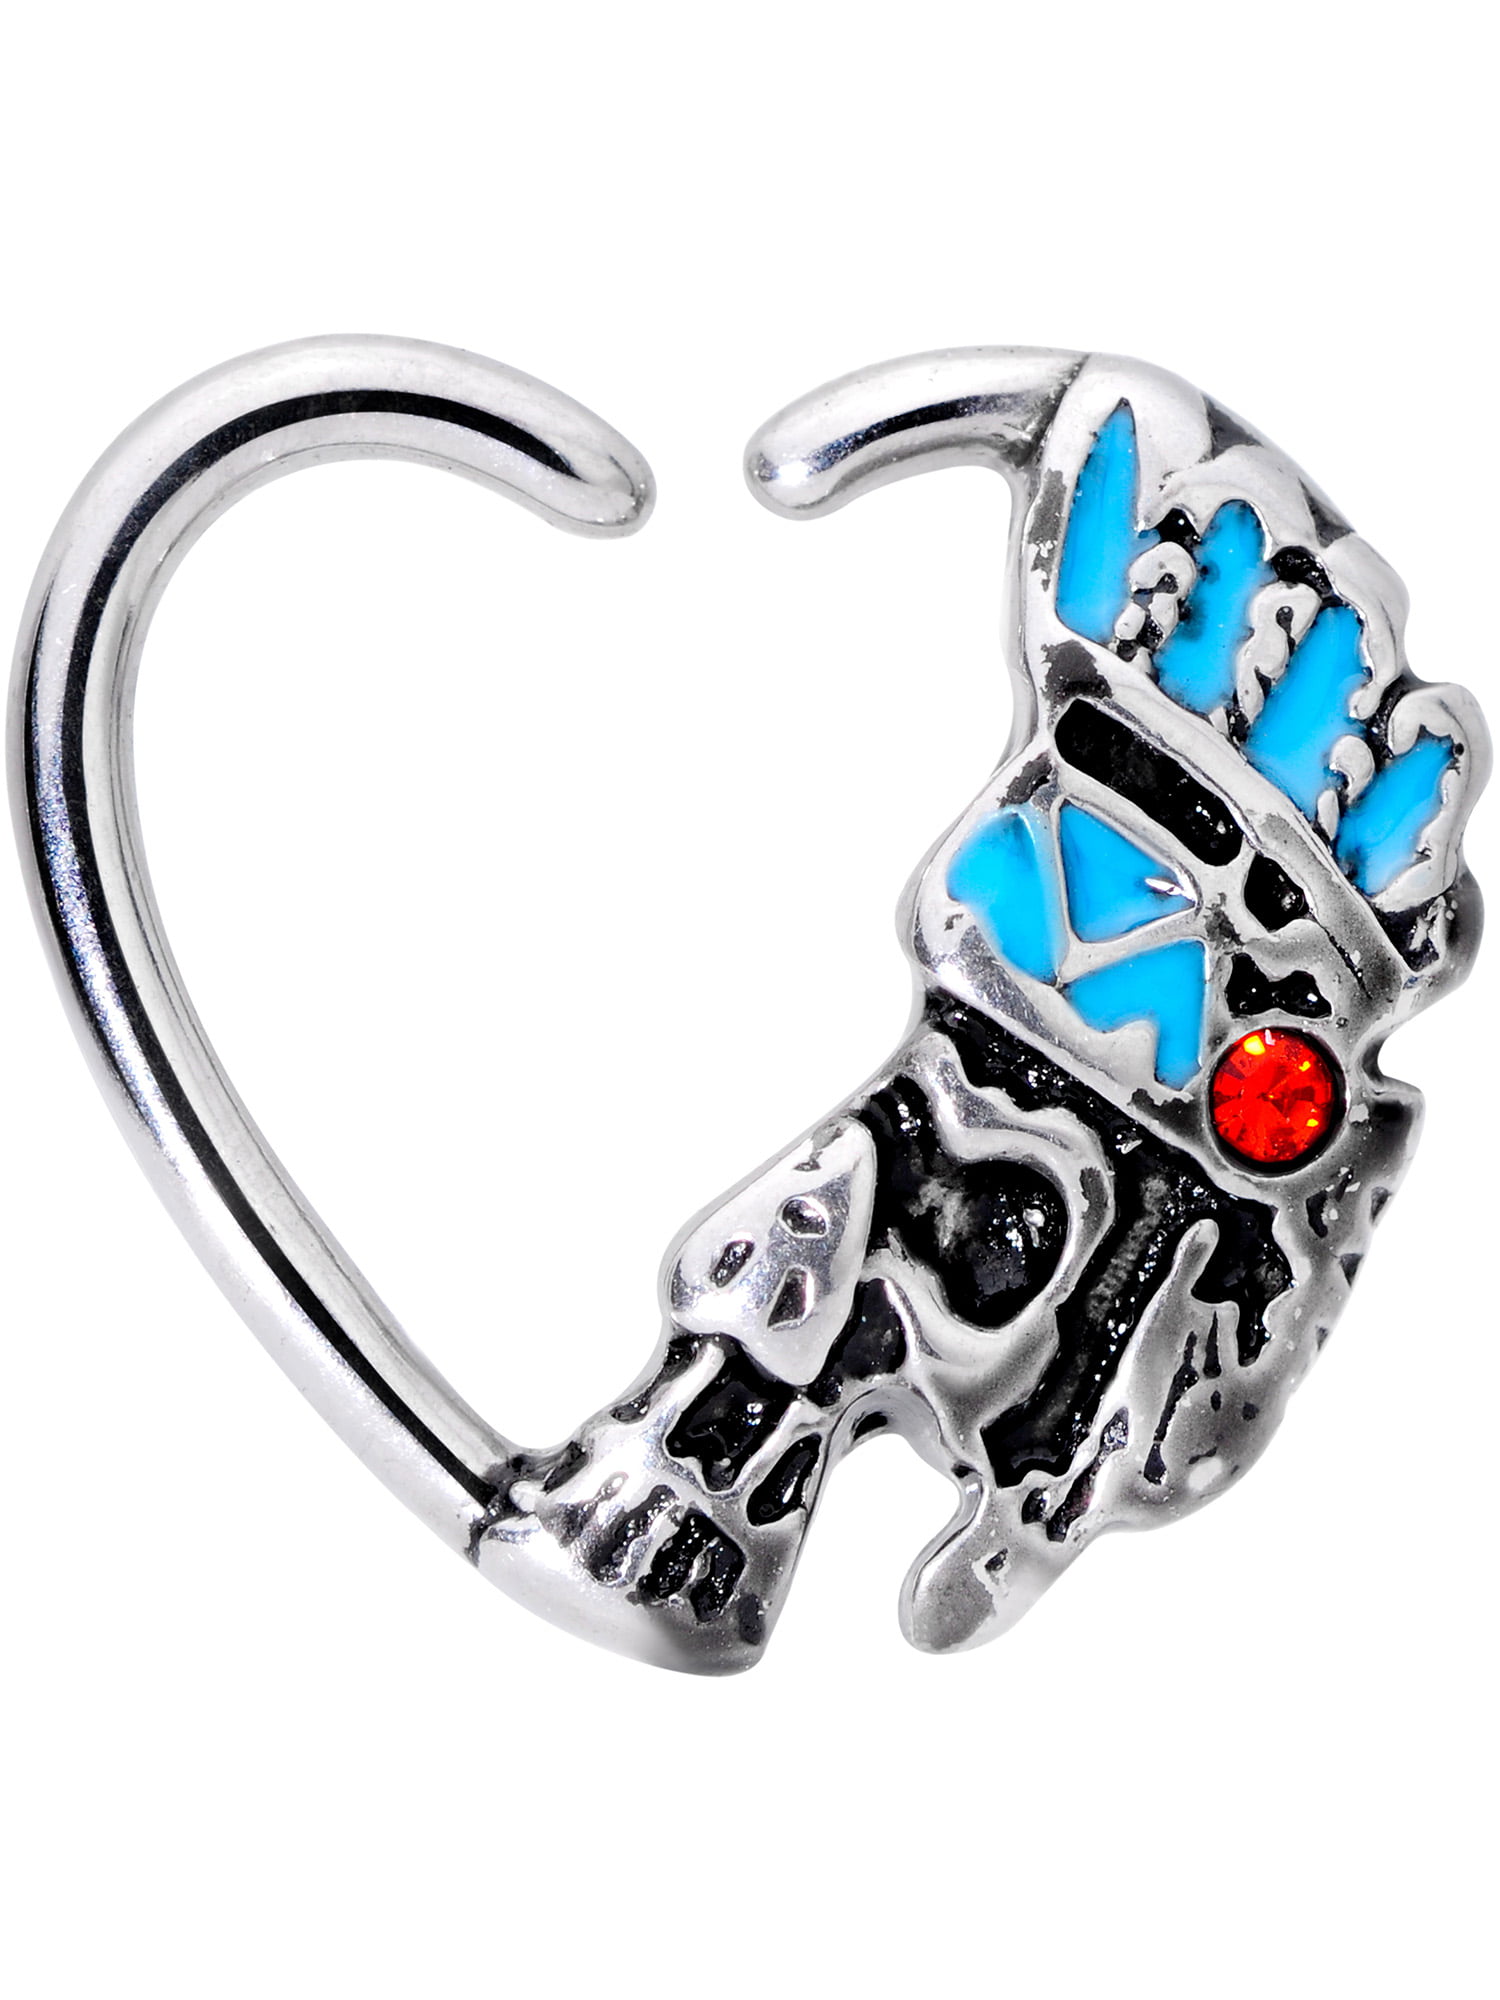 Body Candy 3/8 16G 316L Steel Climbing Dragon Left Heart Closure Ring Daith Helix Tragus Rook 10mm 